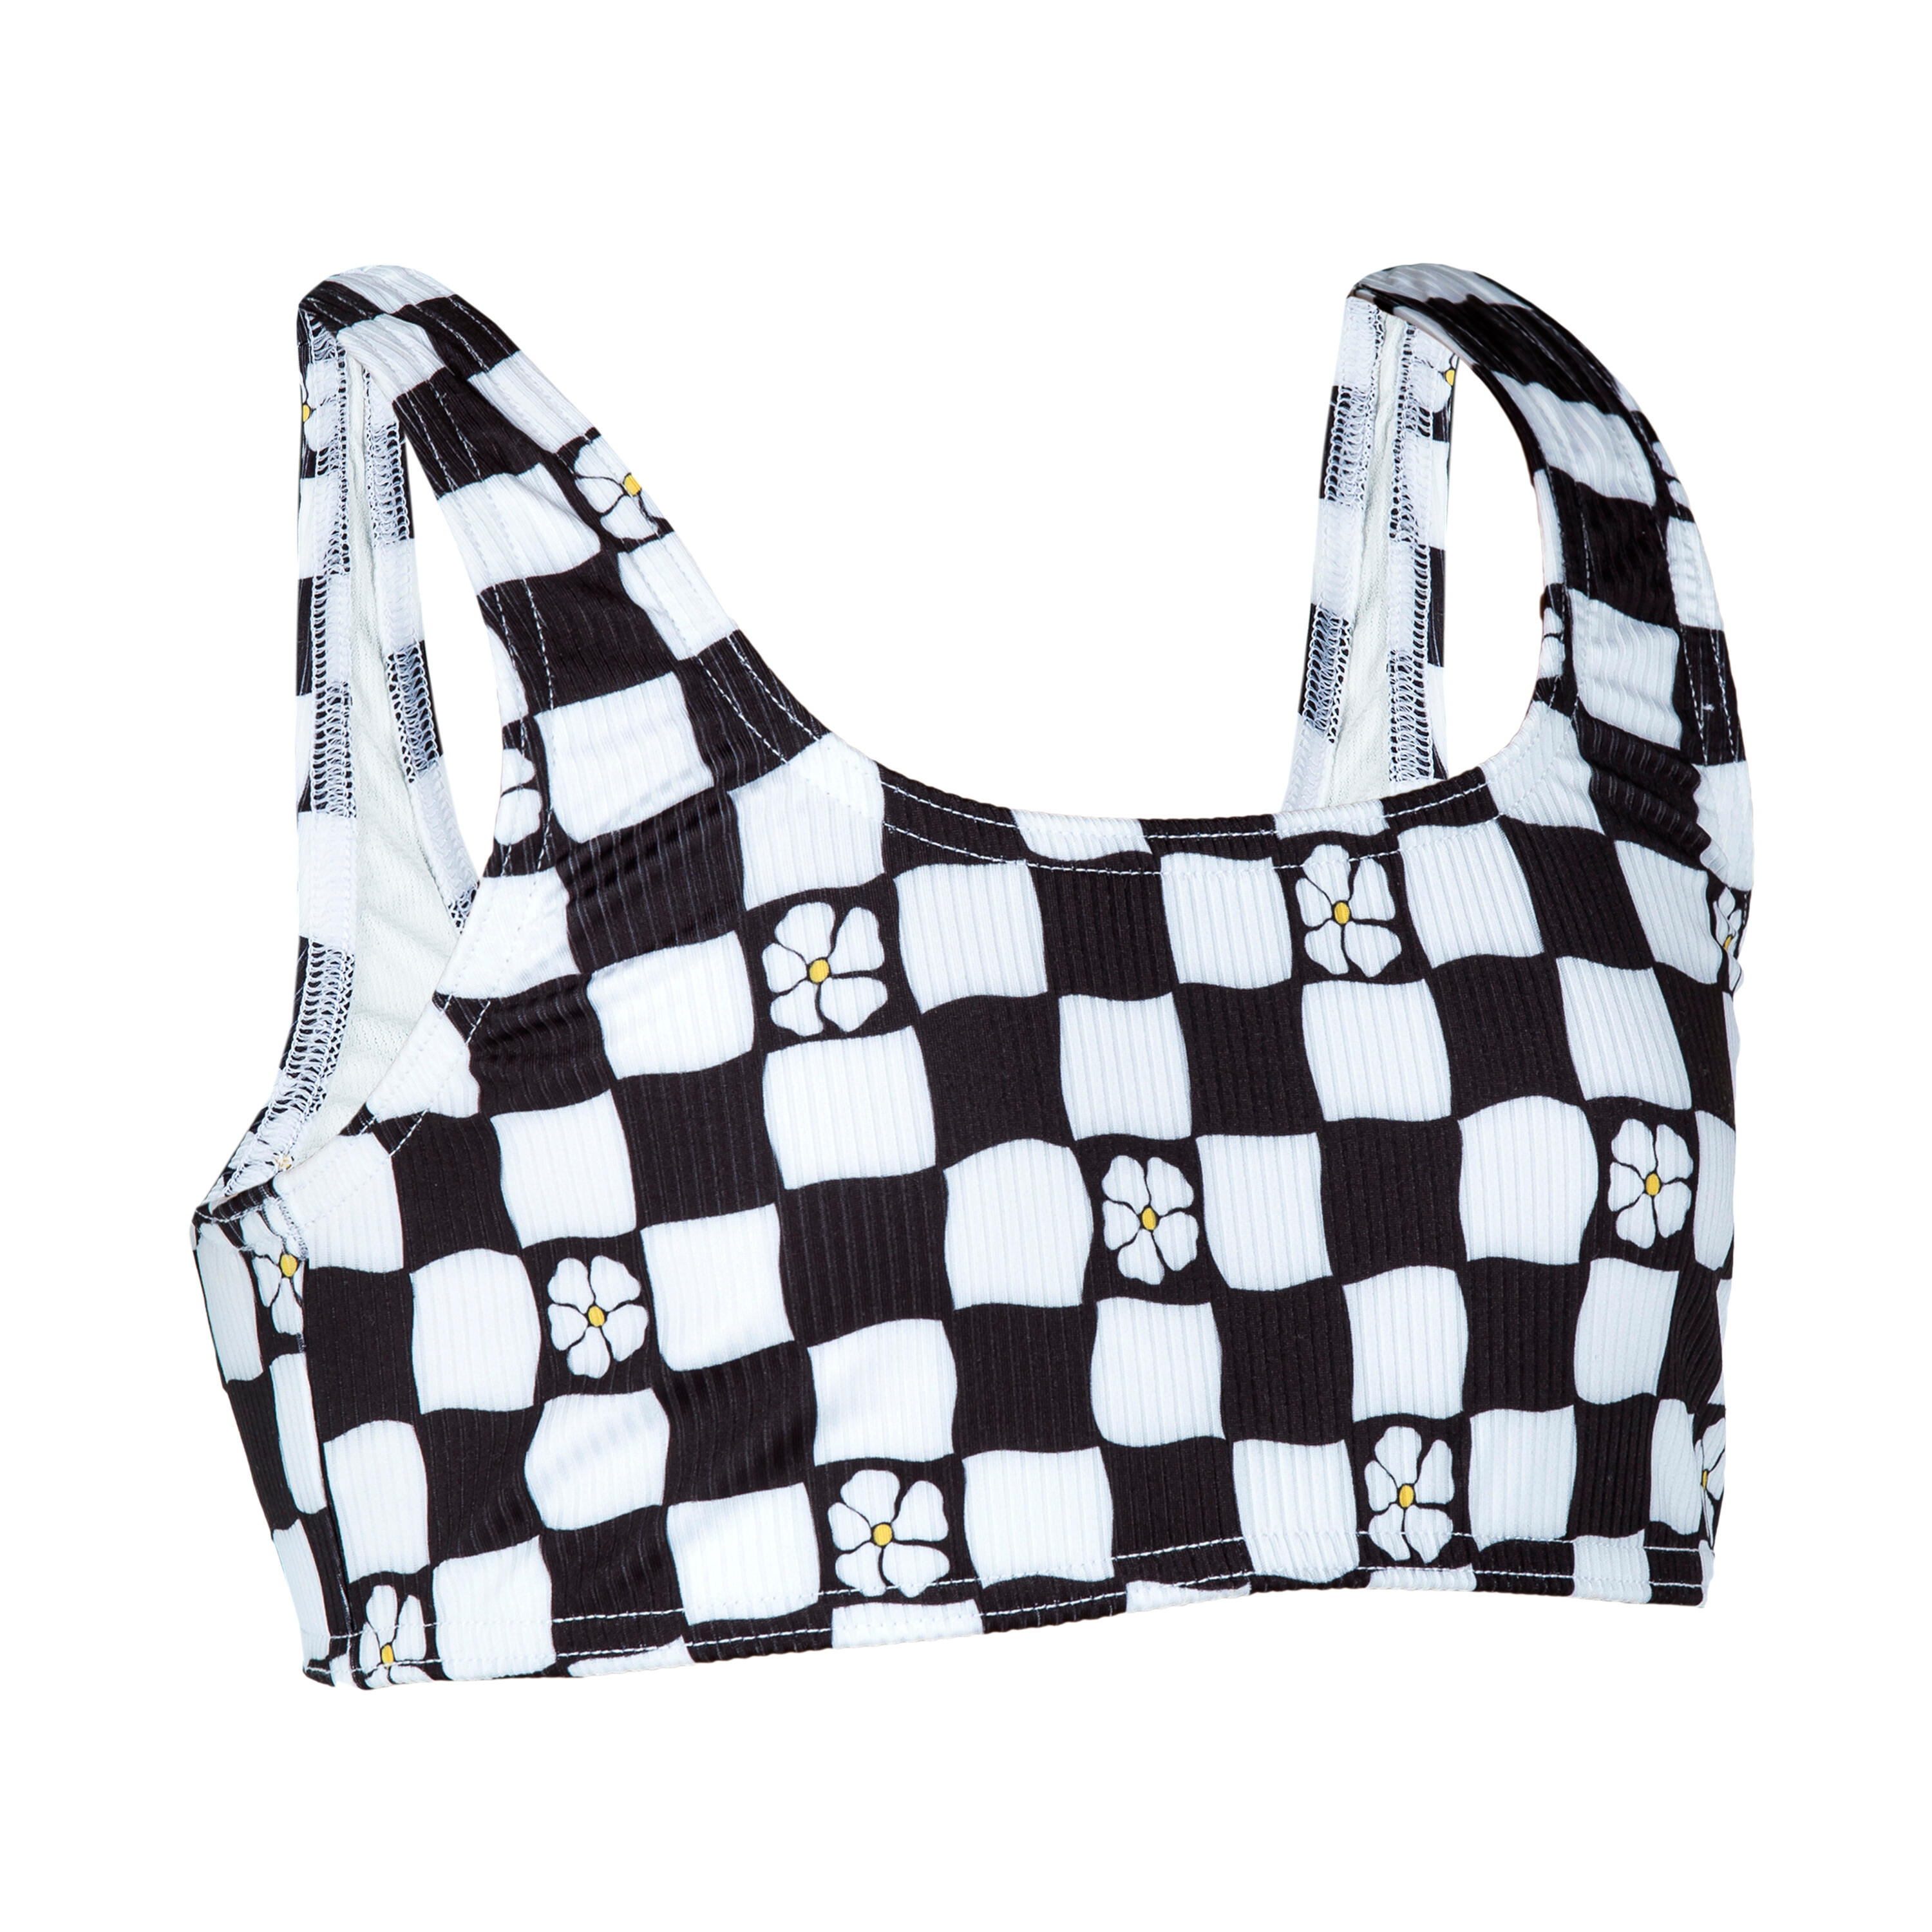 OLAIAN Girl's textured swimsuit crop top - 500 Lana chequered black